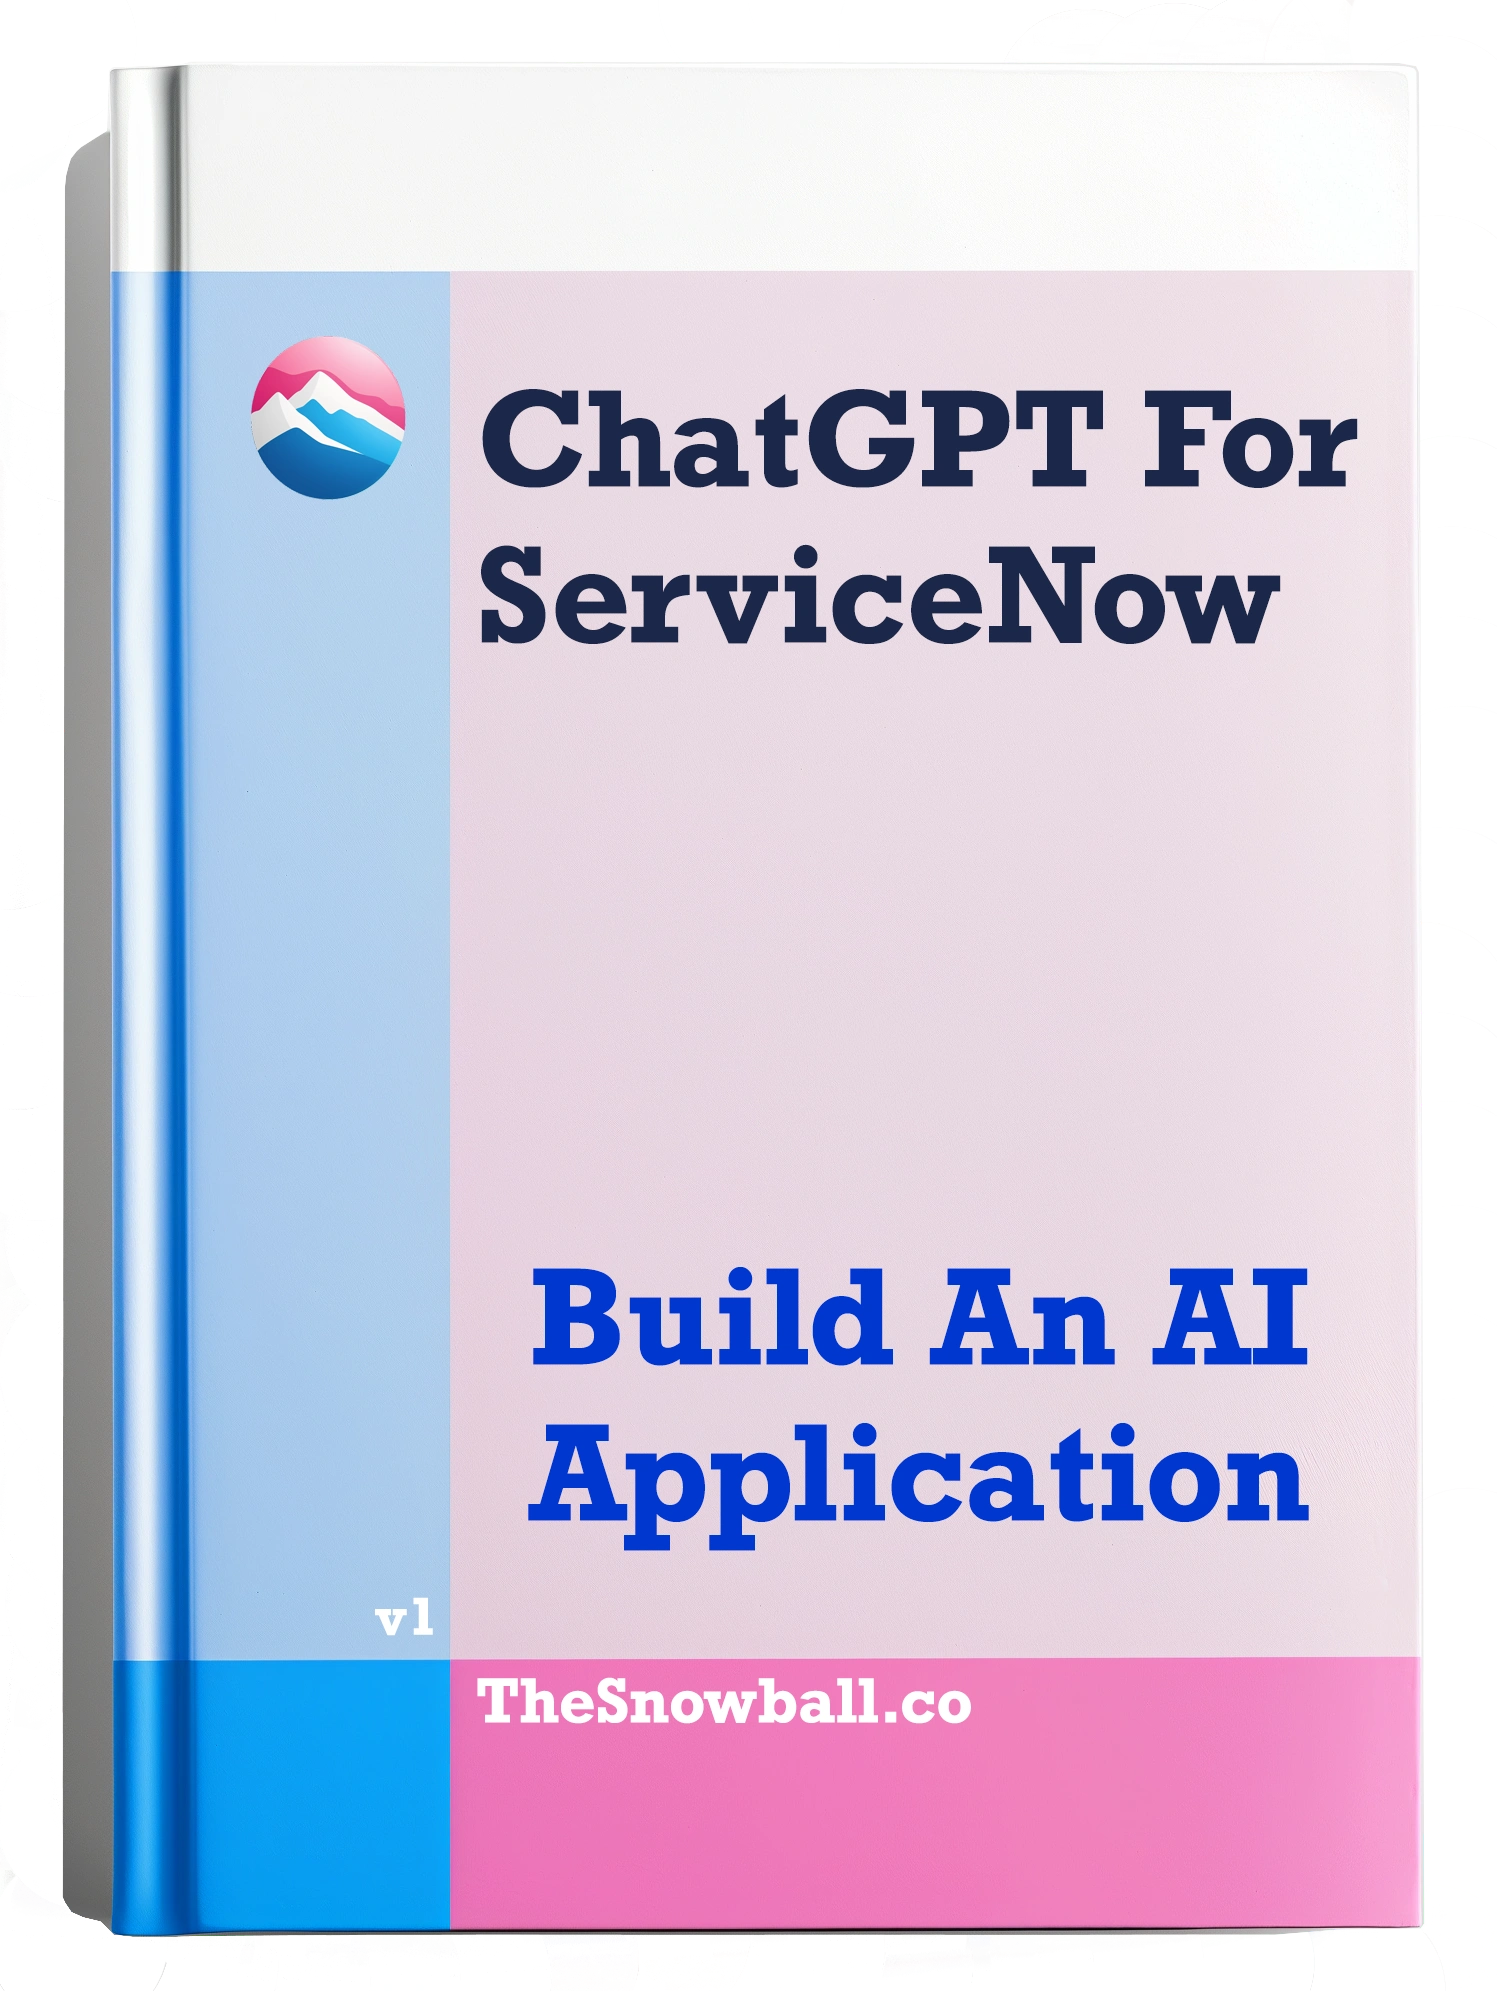 ChatGPT For ServiceNow